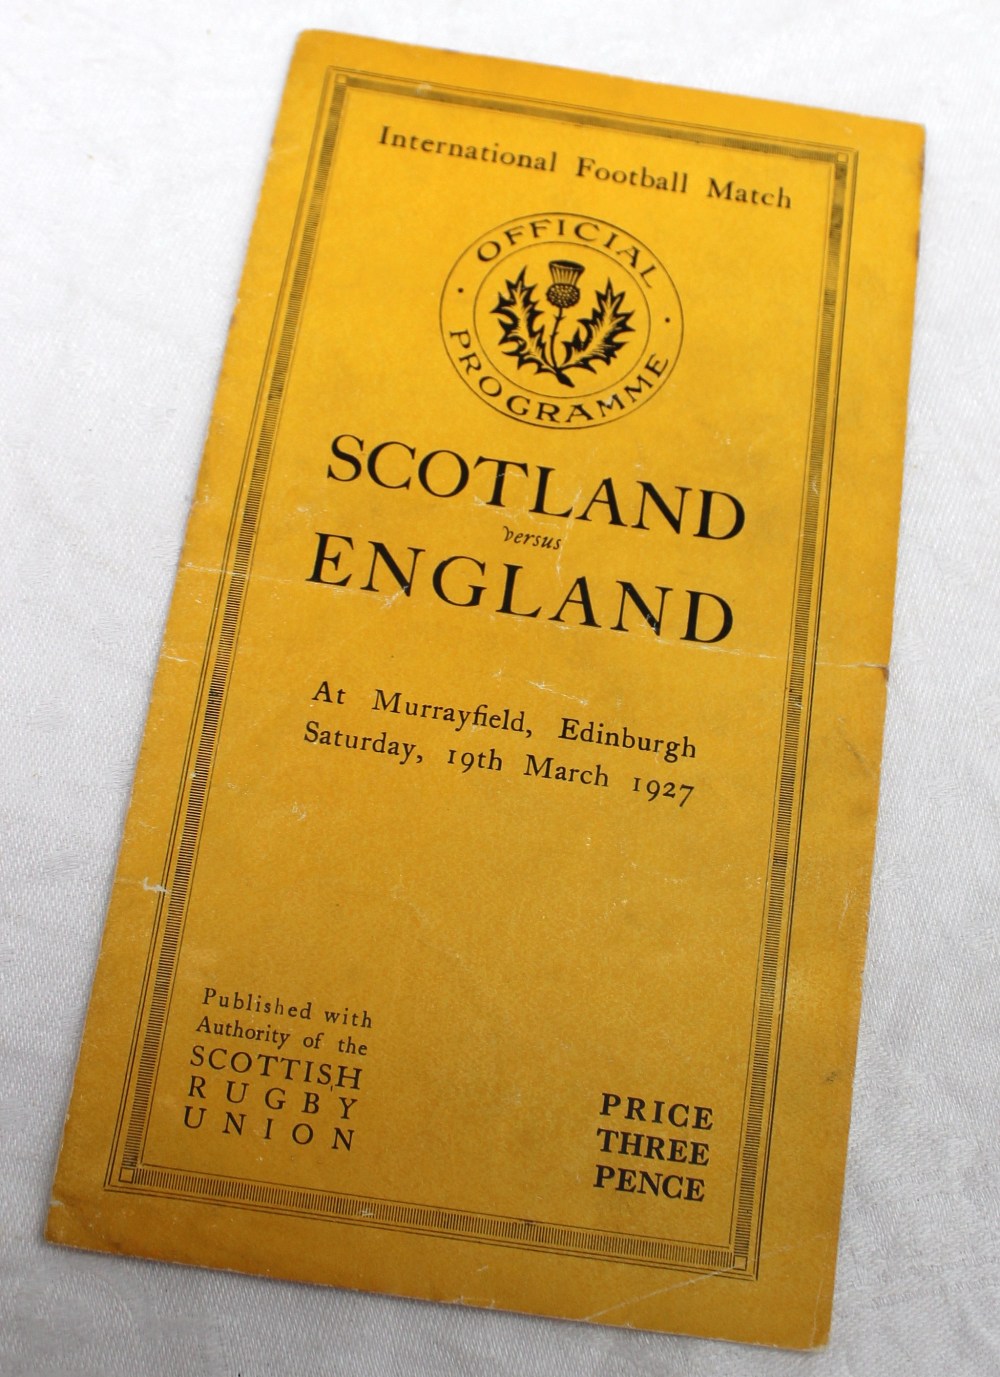 1927 - Scotland v England rugby match programme, played on Saturday 19th March 1927 at Murrayfield,